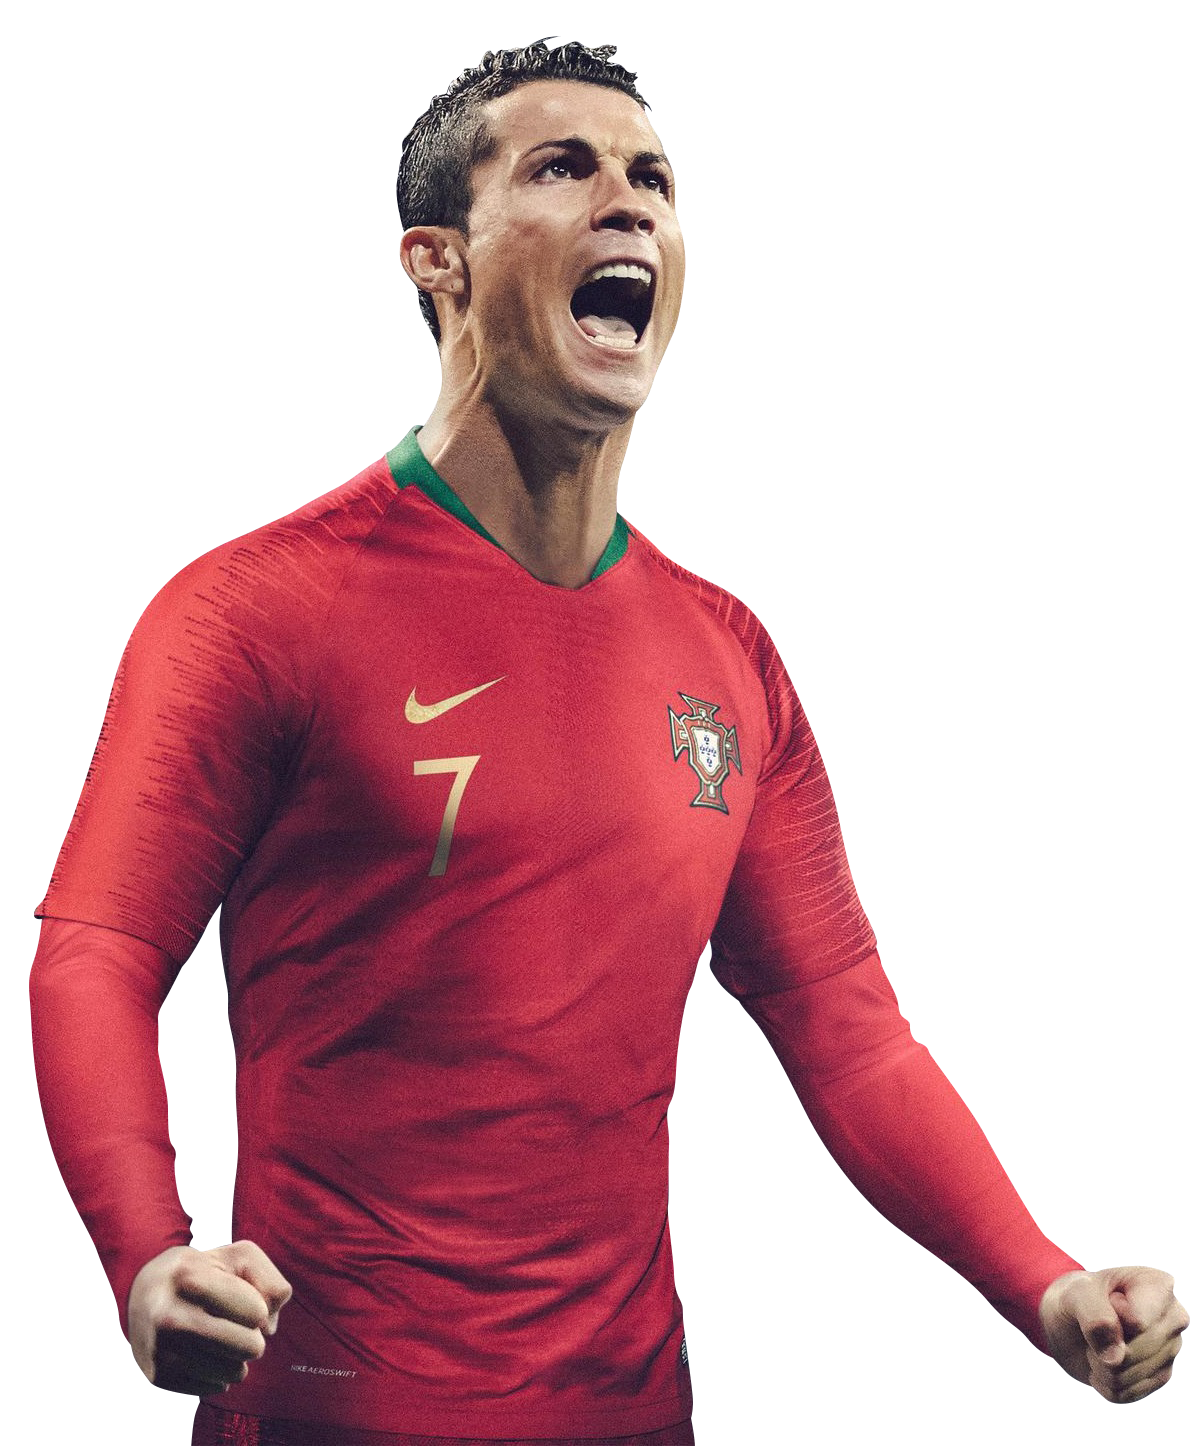 Cristiano Ronaldo In The New Jersey For Portugal's National Football ...